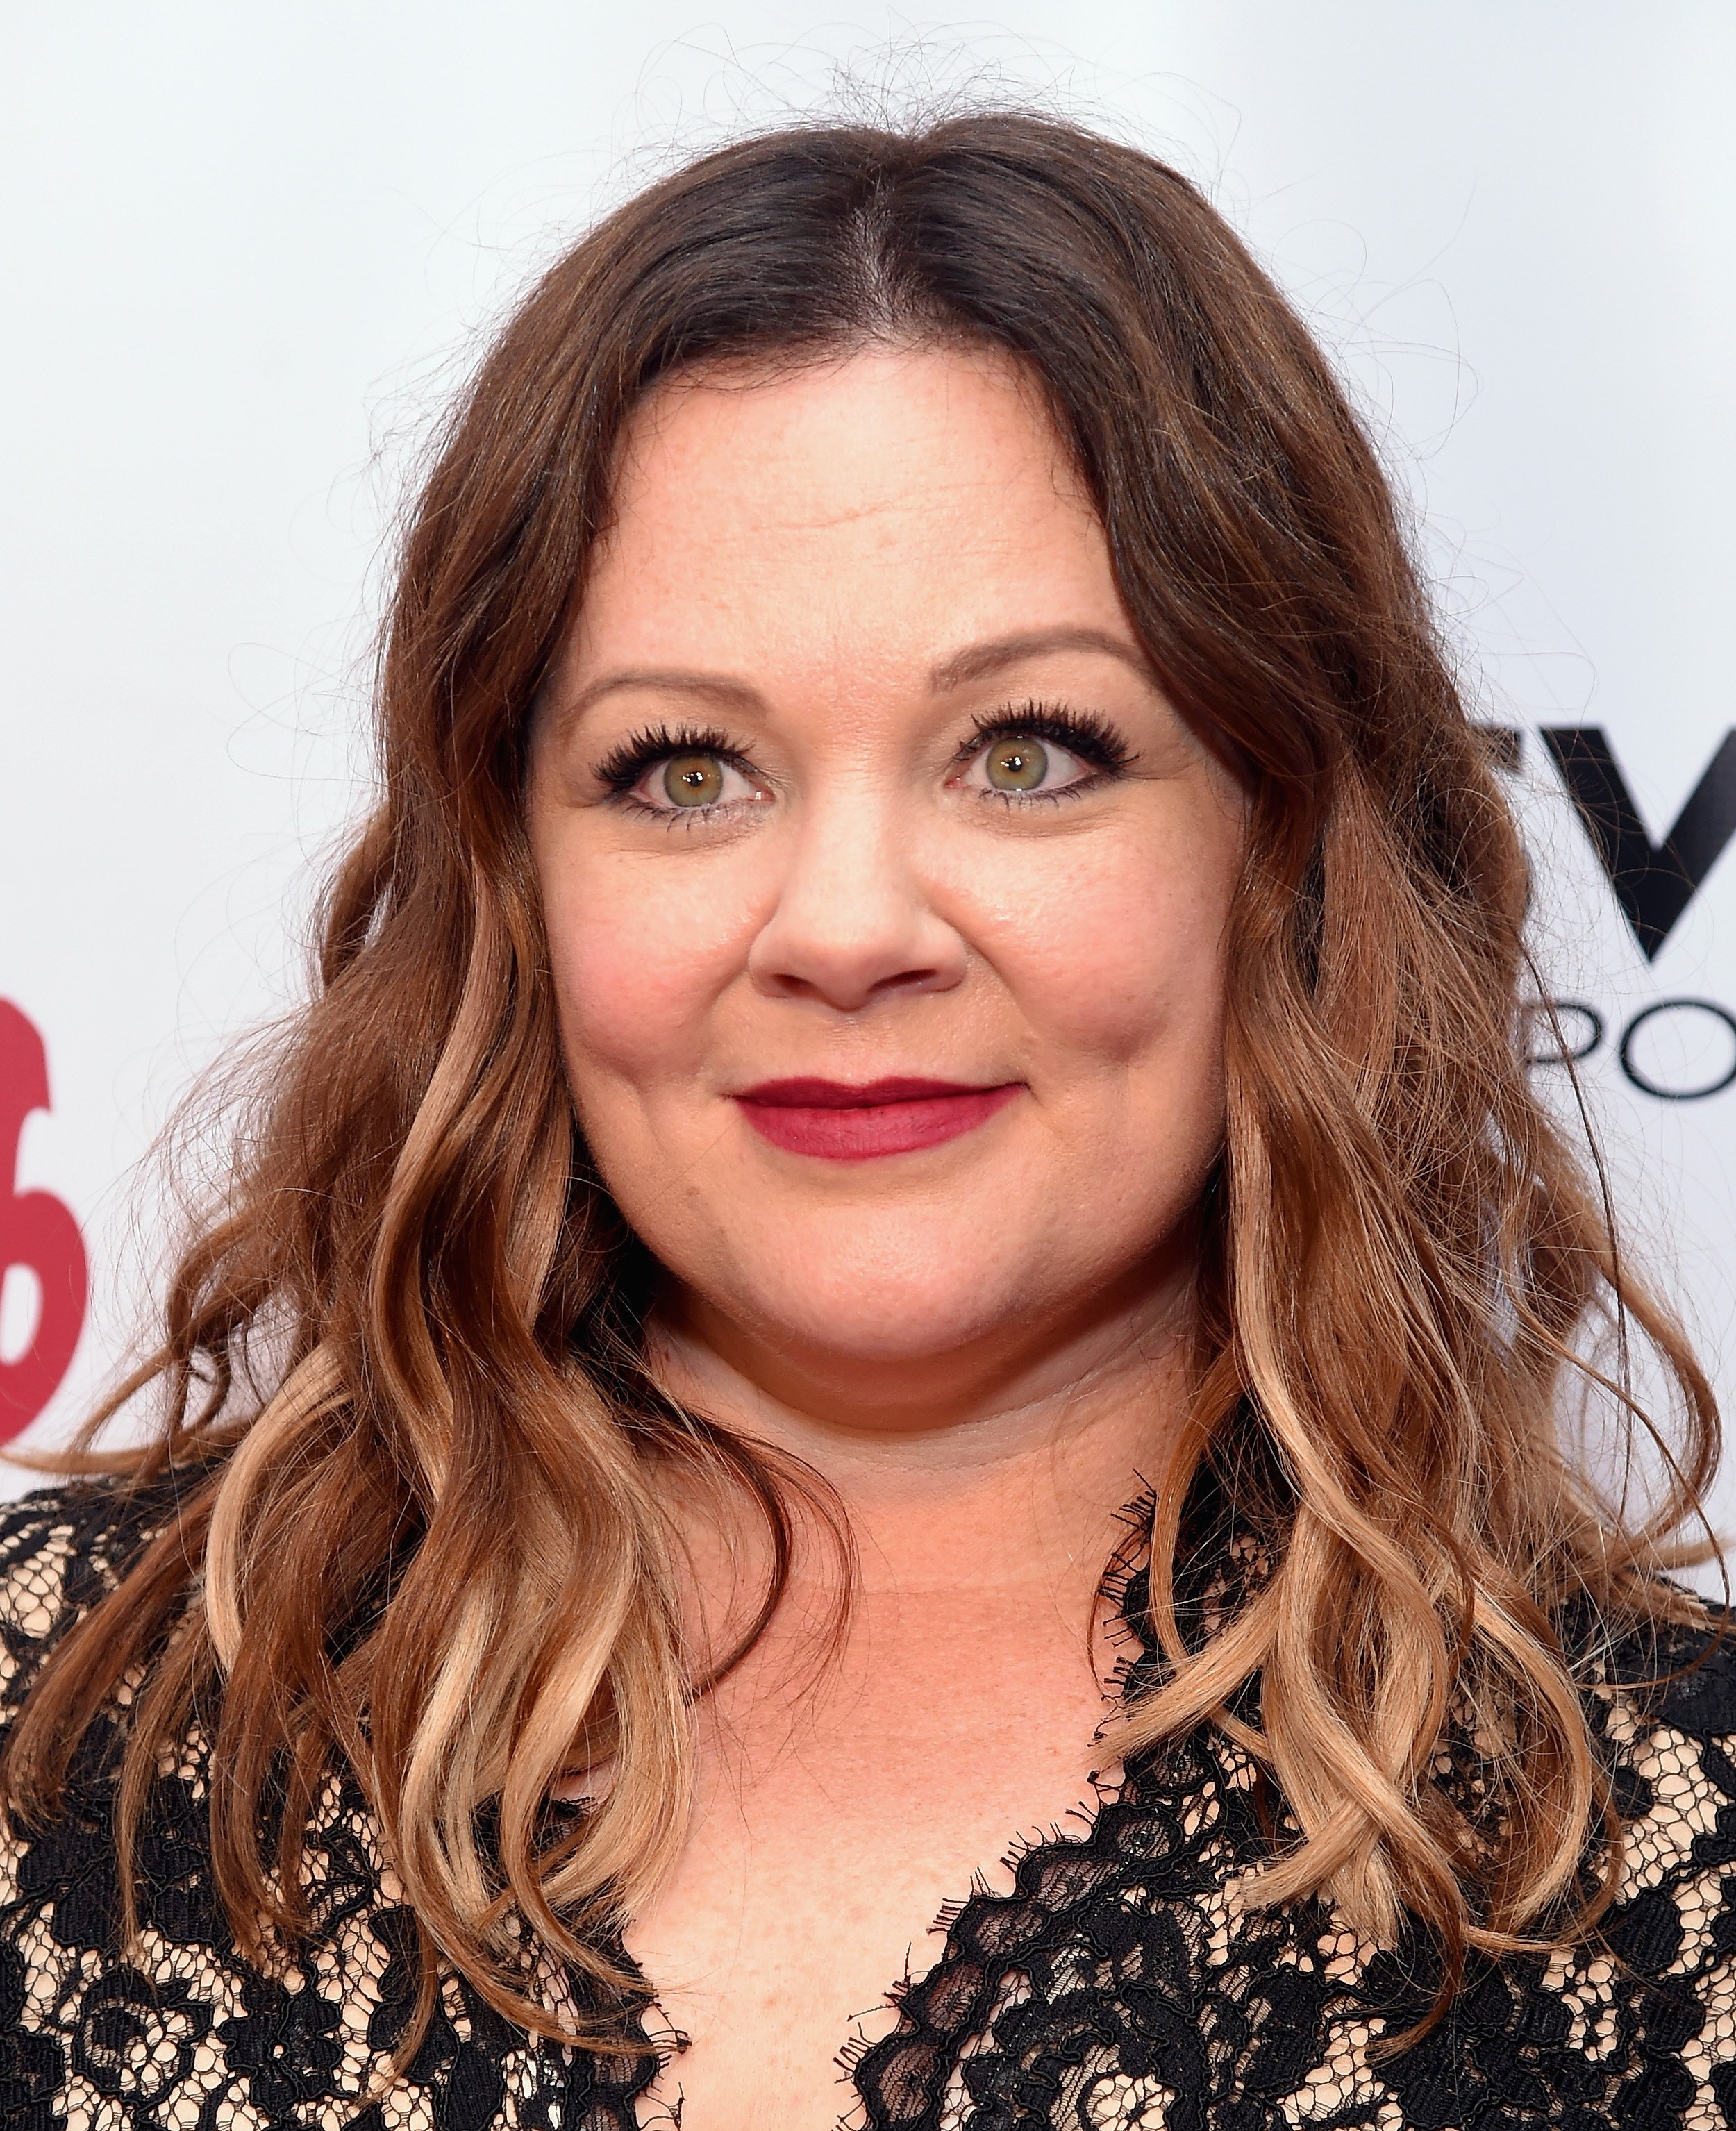 Melissa McCarthy at the Gildafest '16 on July 12, 2016 in New York City. |Photo: Getty Images